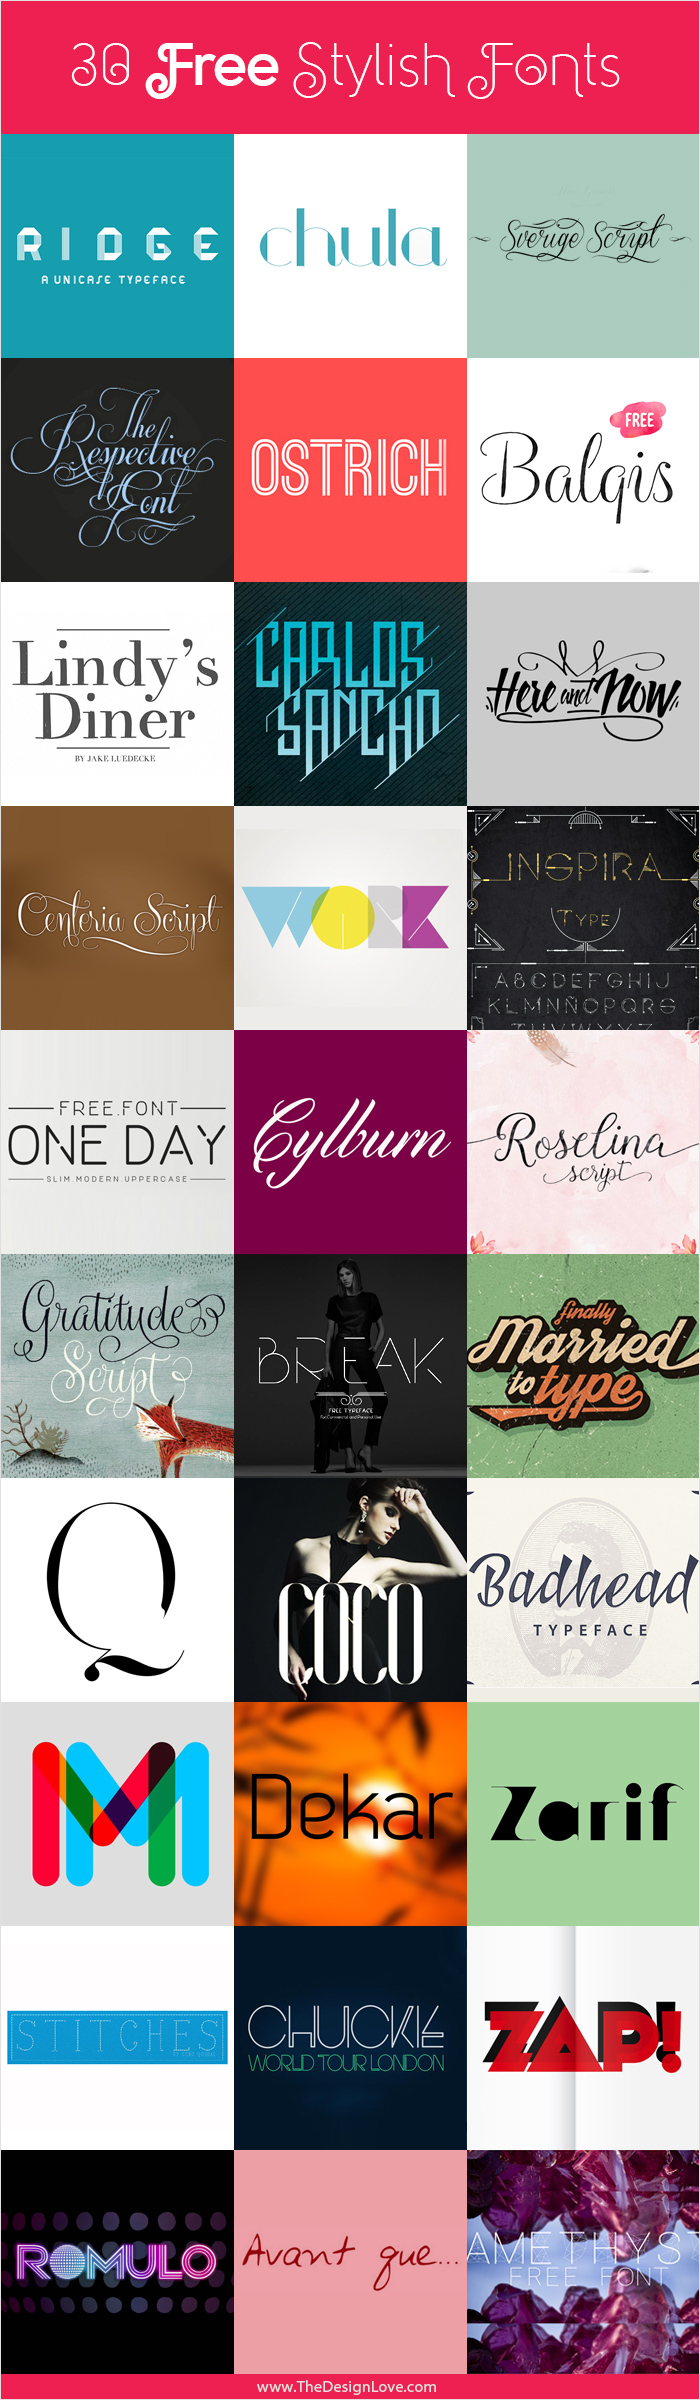 cool-fonts-top-30-free-stylish-fonts-to-download